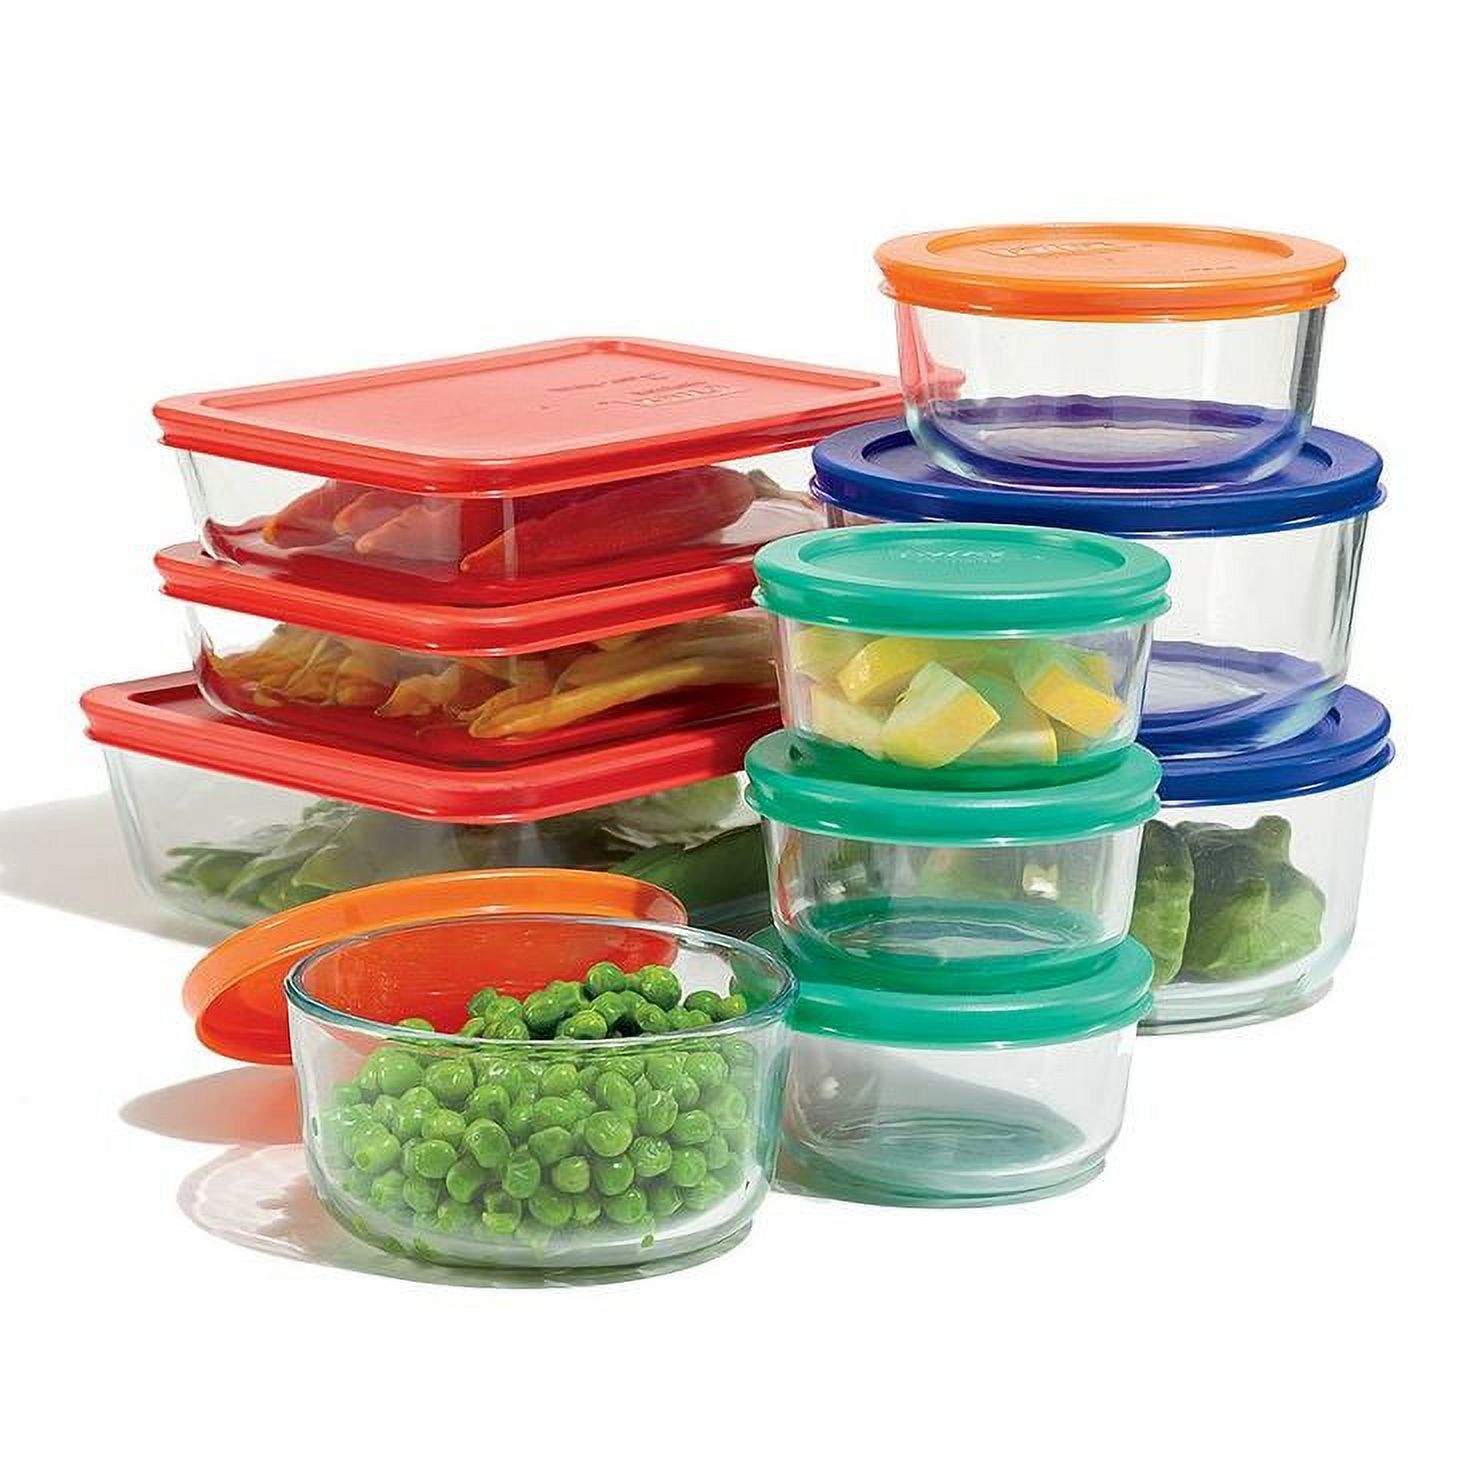 Pyrex Simply Food Storage & Bakeware Set with Colored Lids, 28 Piece - image 4 of 7